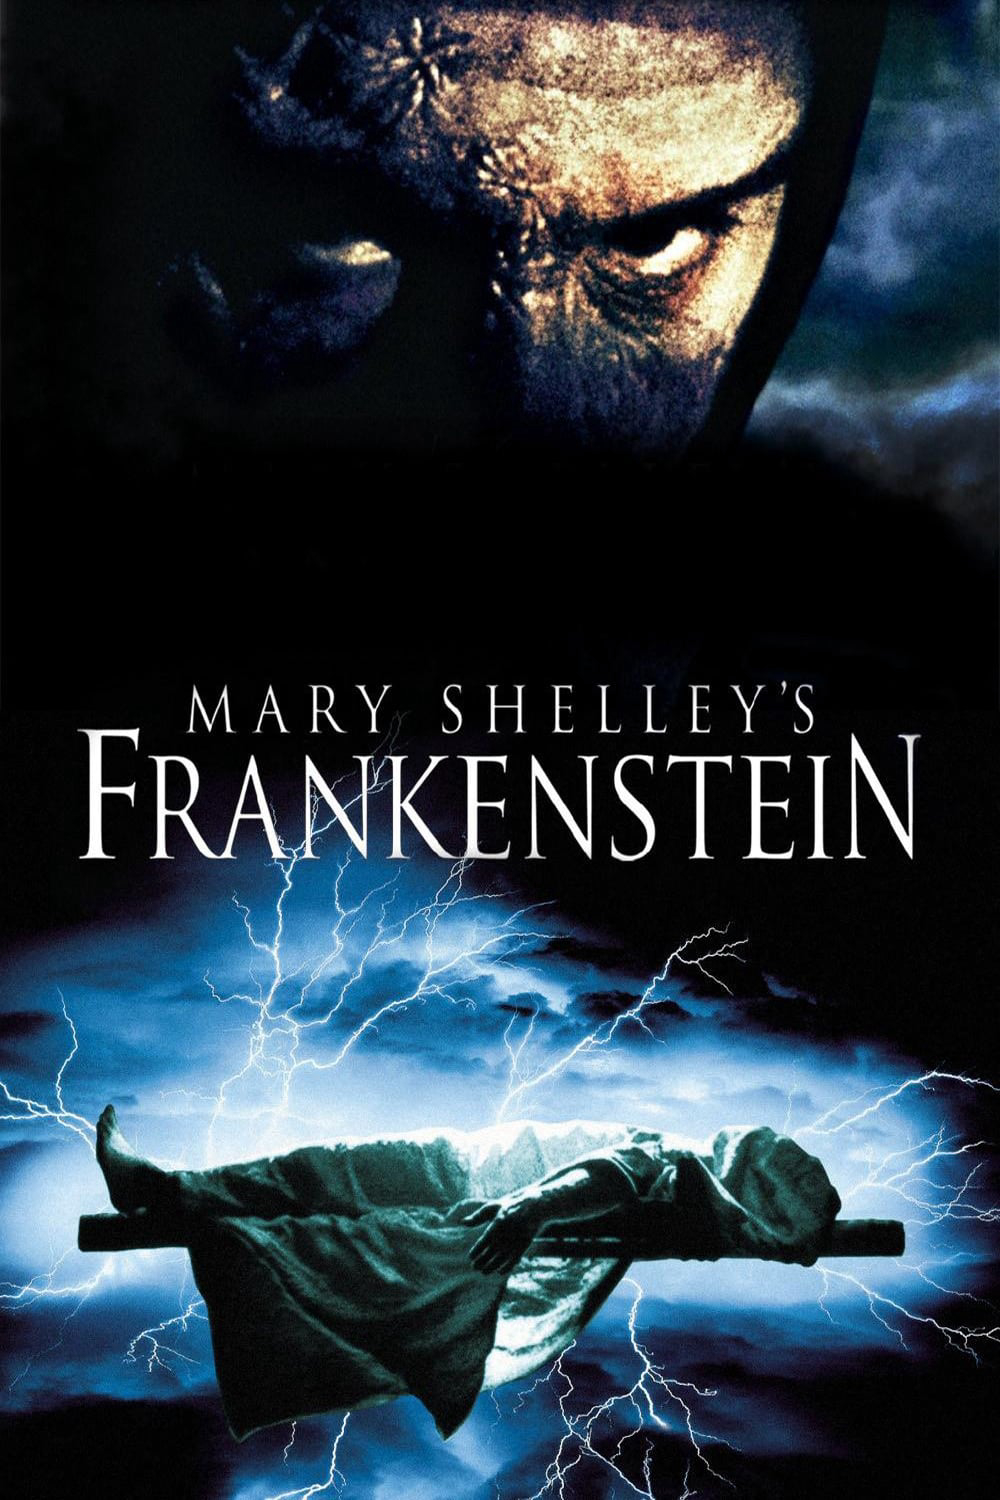 Poster Phim Mary Shelley's Frankenstein (Mary Shelley's Frankenstein)